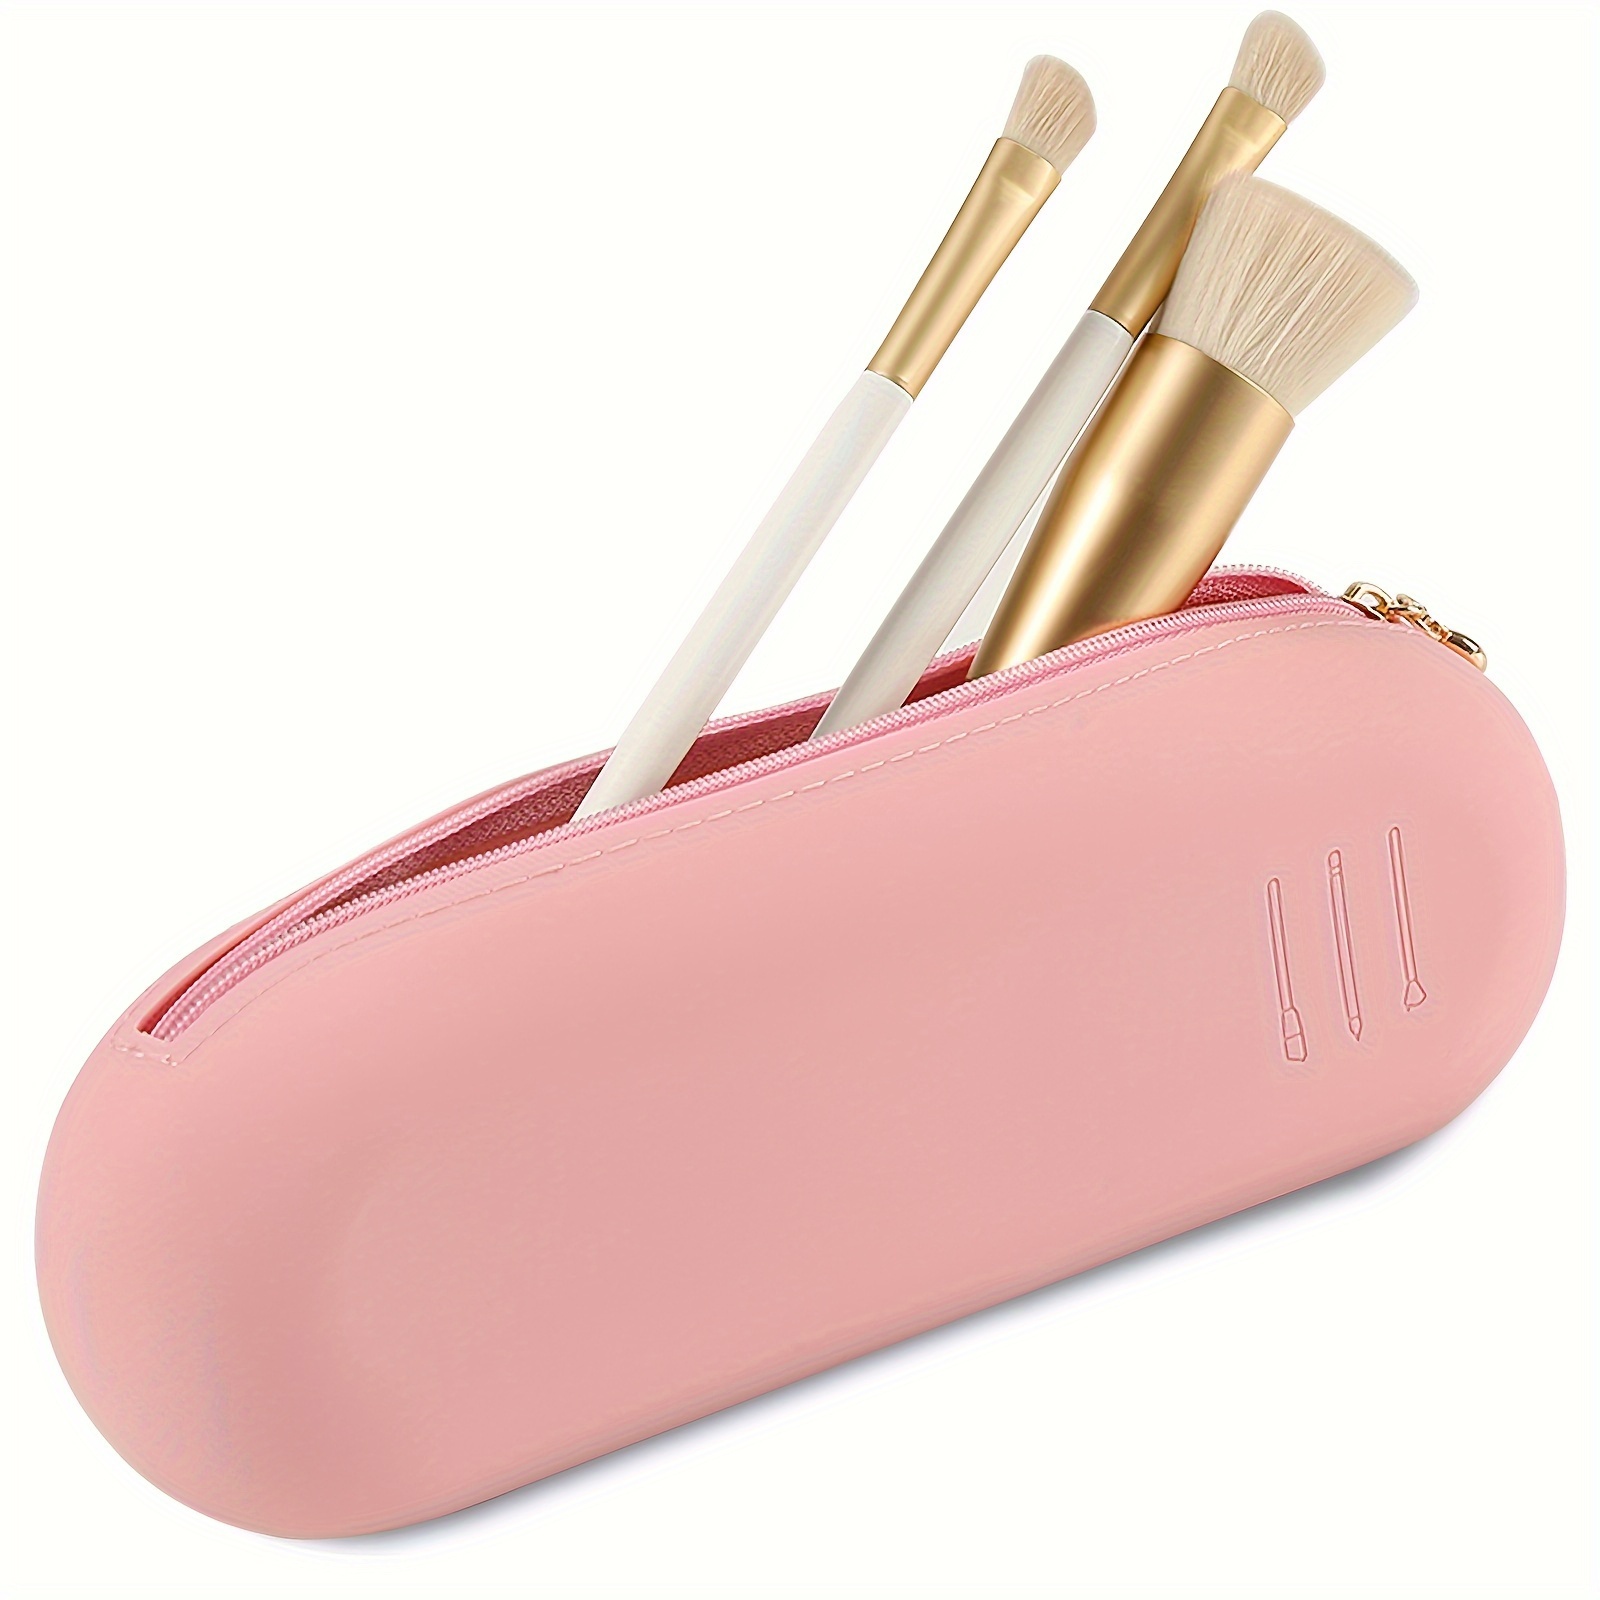 Silicone Makeup Brush Holder,Travel Makeup Brush Case Bag Cute Soft  Portable Cosmetic Brushes Holders,Waterproof Makeup Brushes Organizer for  Traveling with Magnetic Closure 